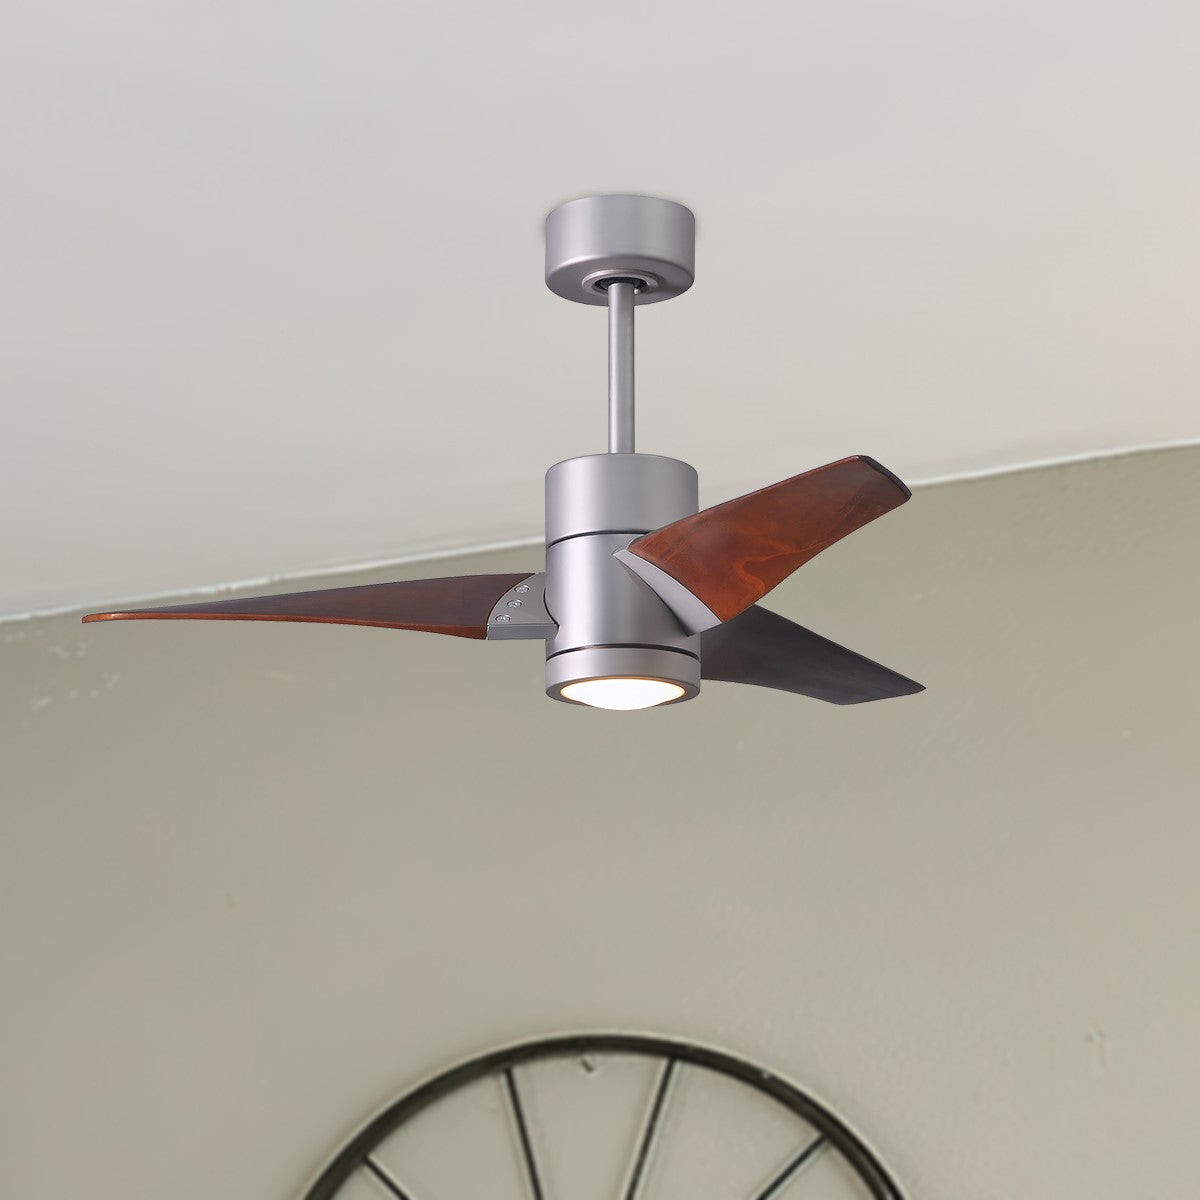 Super Janet 42 Inch Outdoor Ceiling Fan With Light, Wall And Remote Control Included